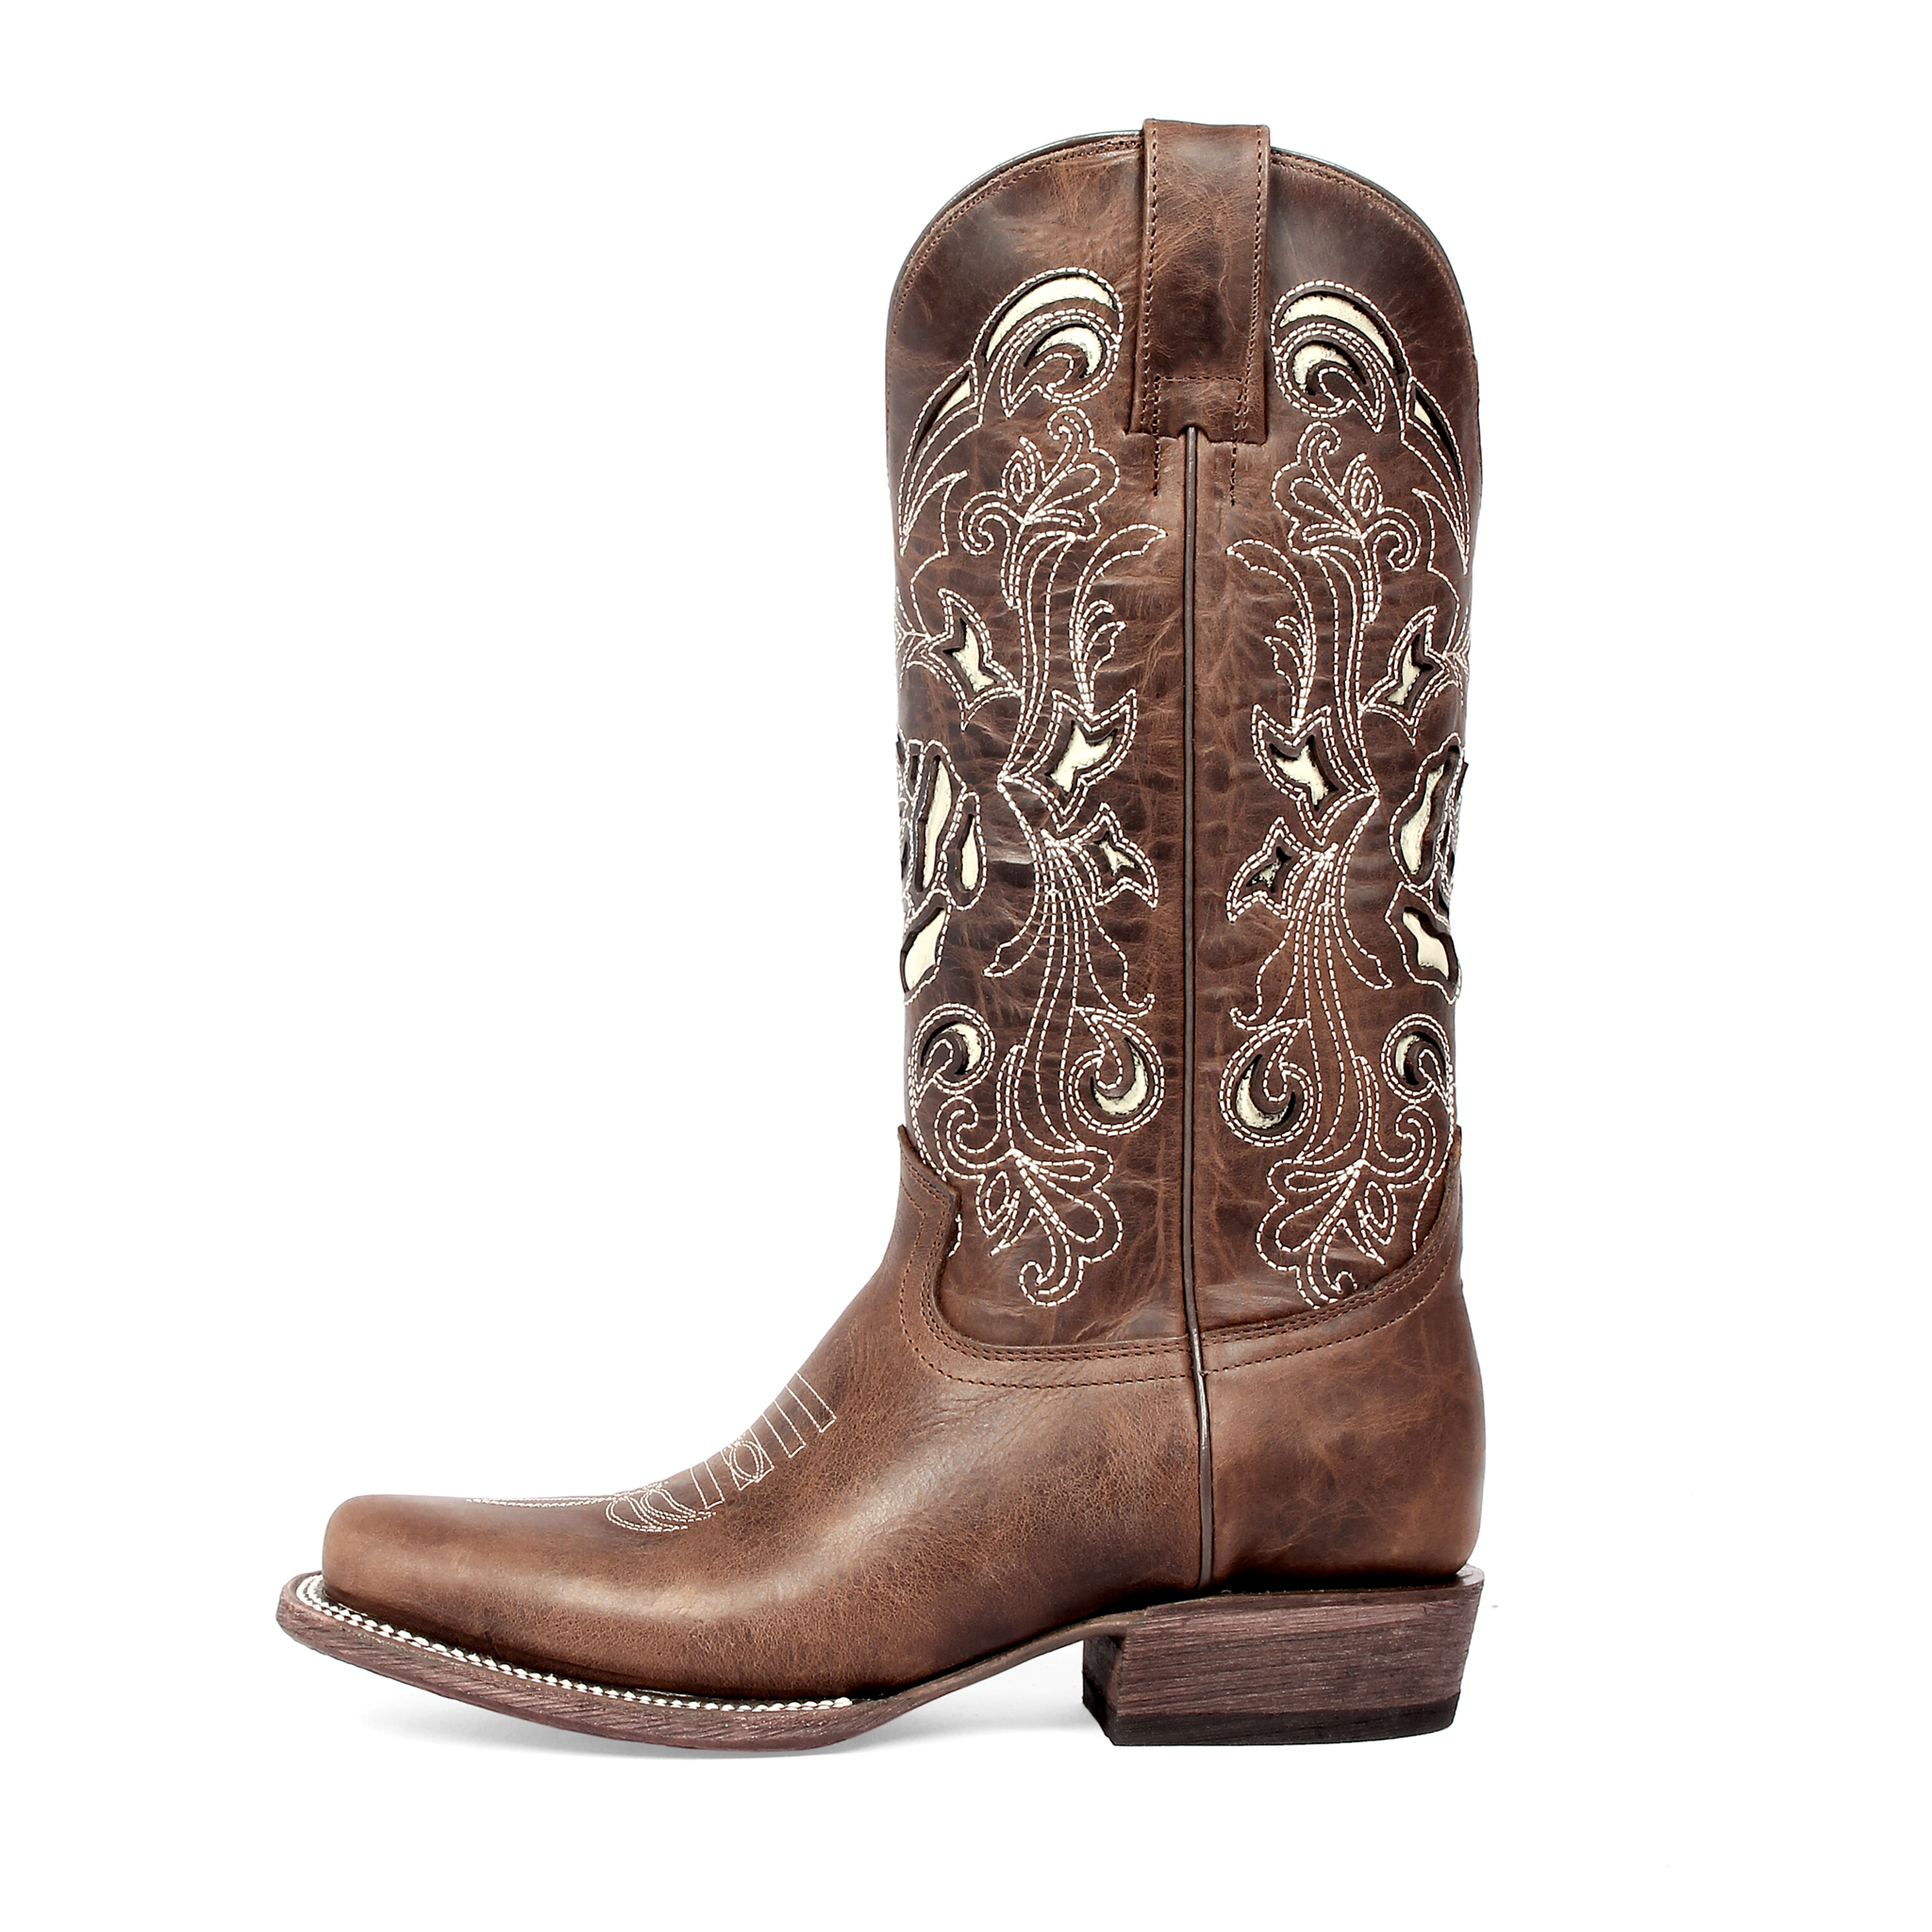 JB-1505 Sand - Western Boots for Women